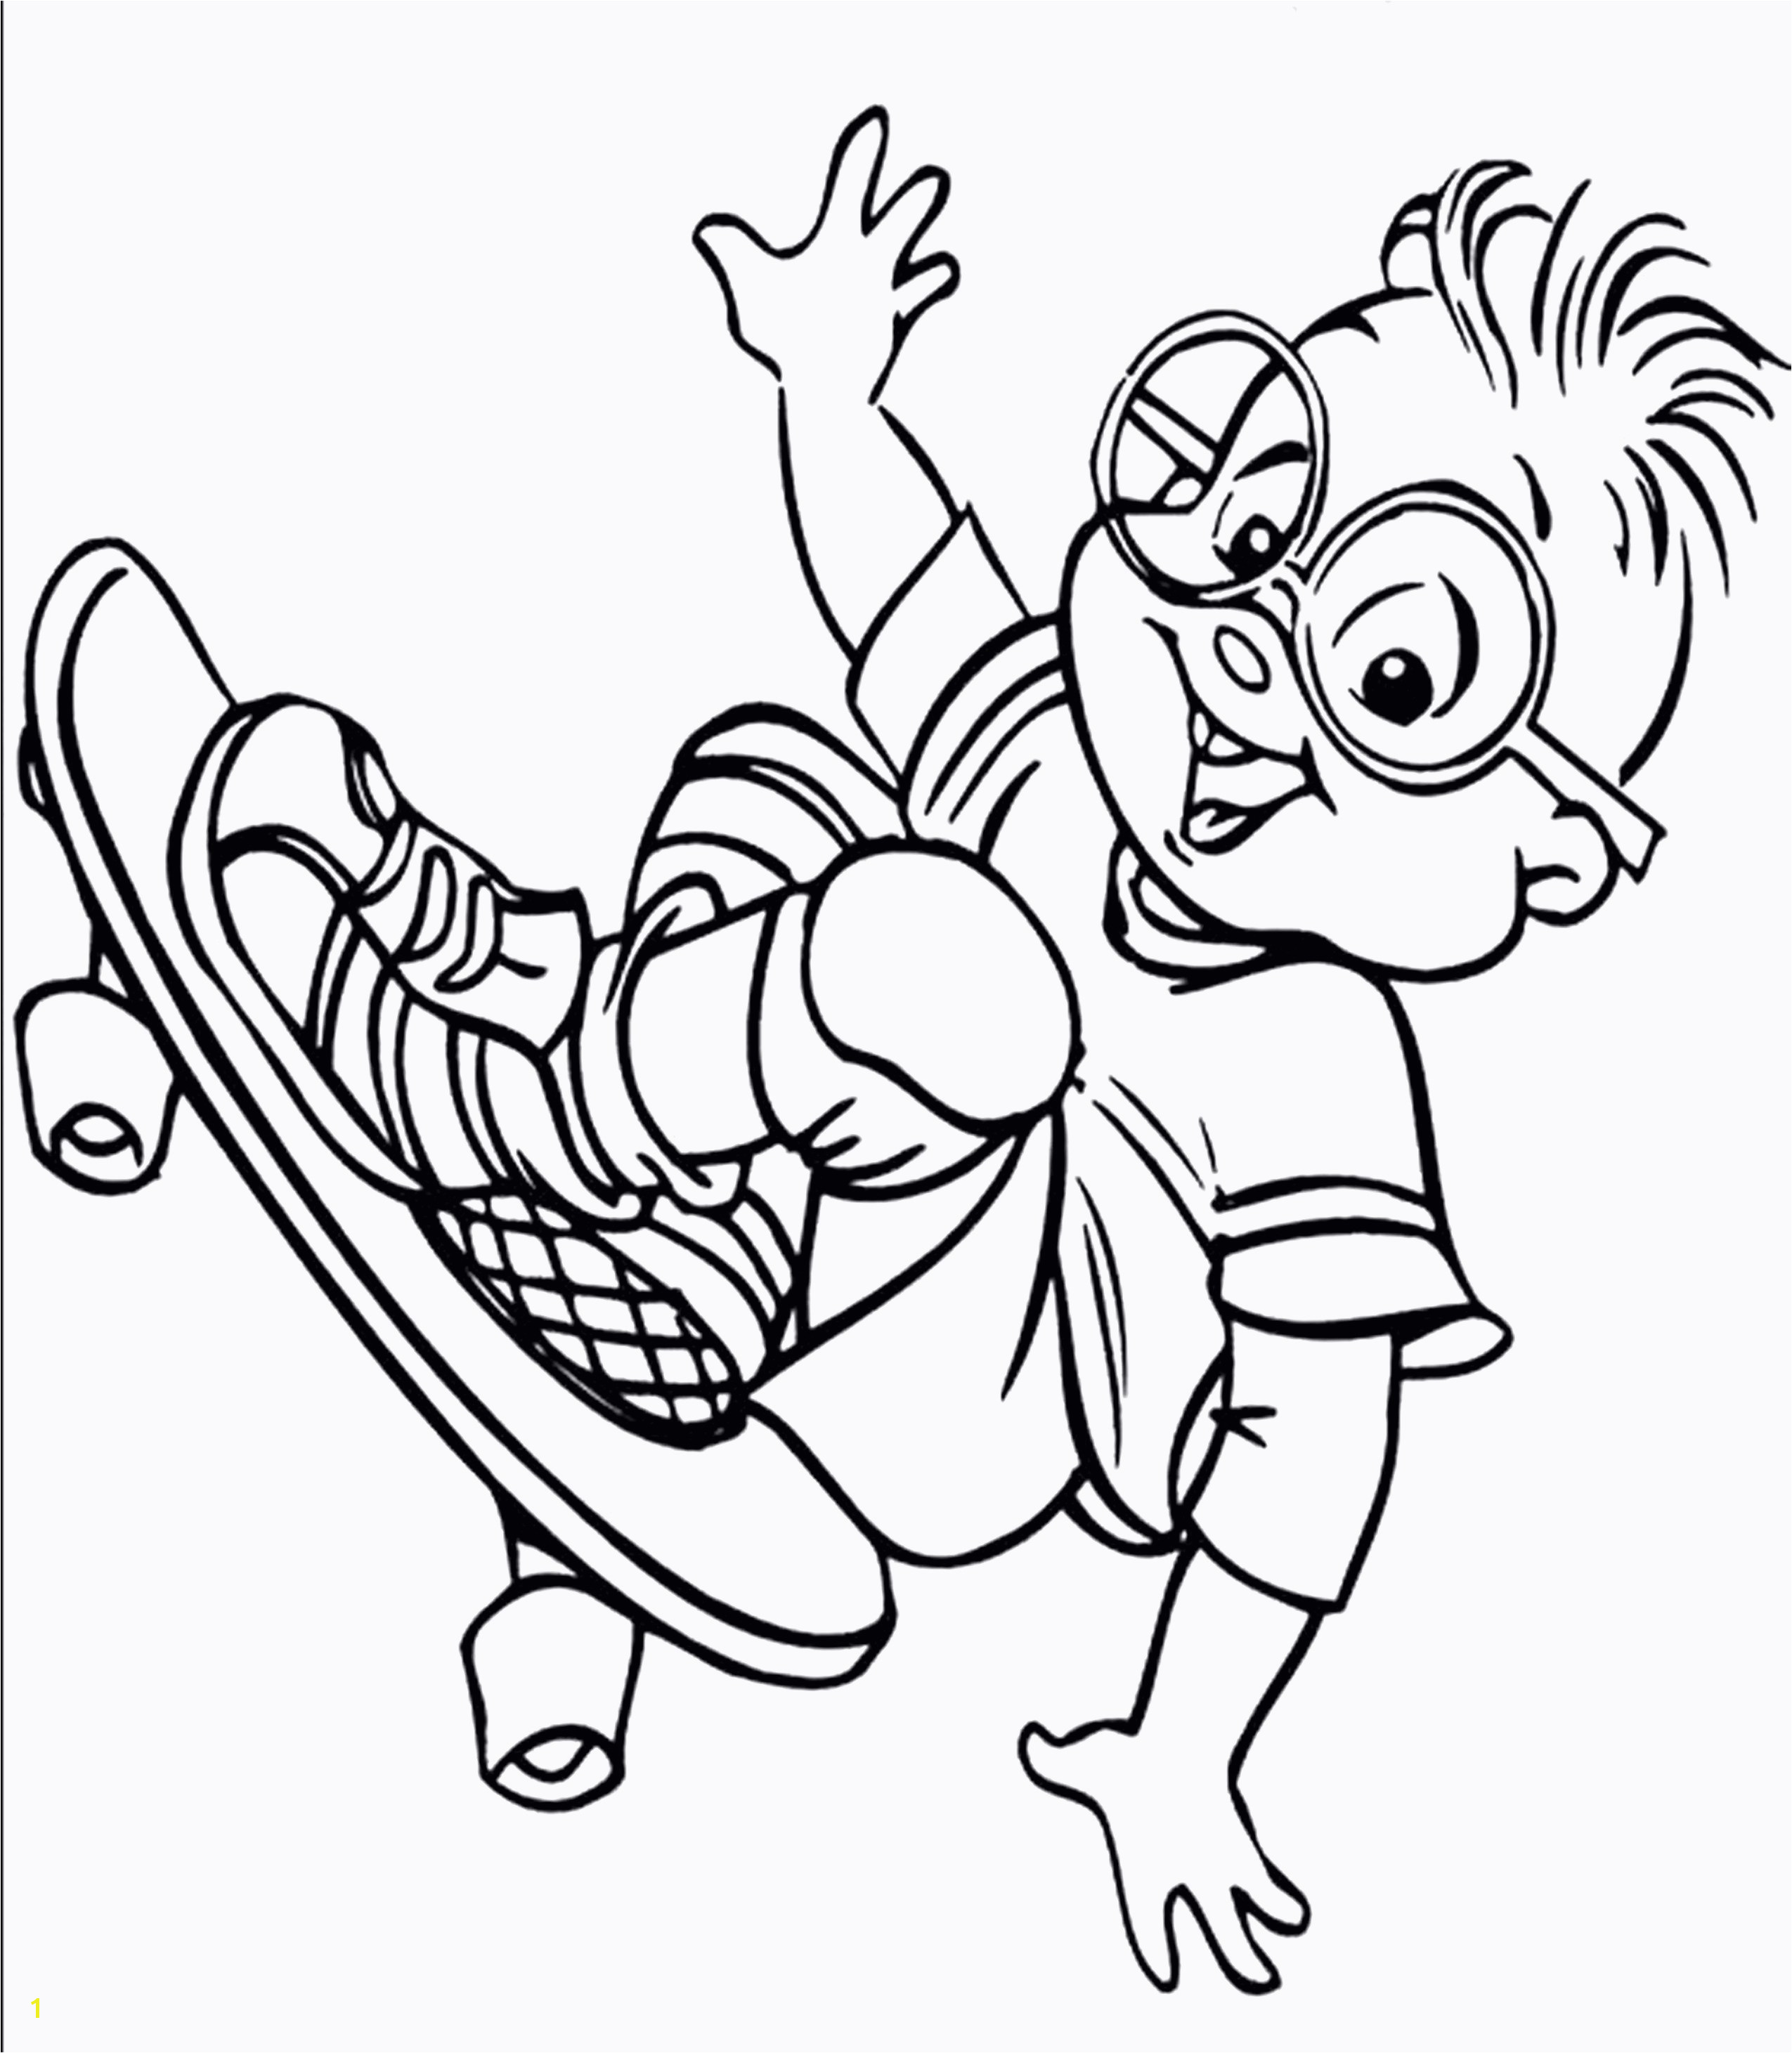 Cornucopia Coloring Pages Kids Printing Disney Printing Coloring Pages Inspirational